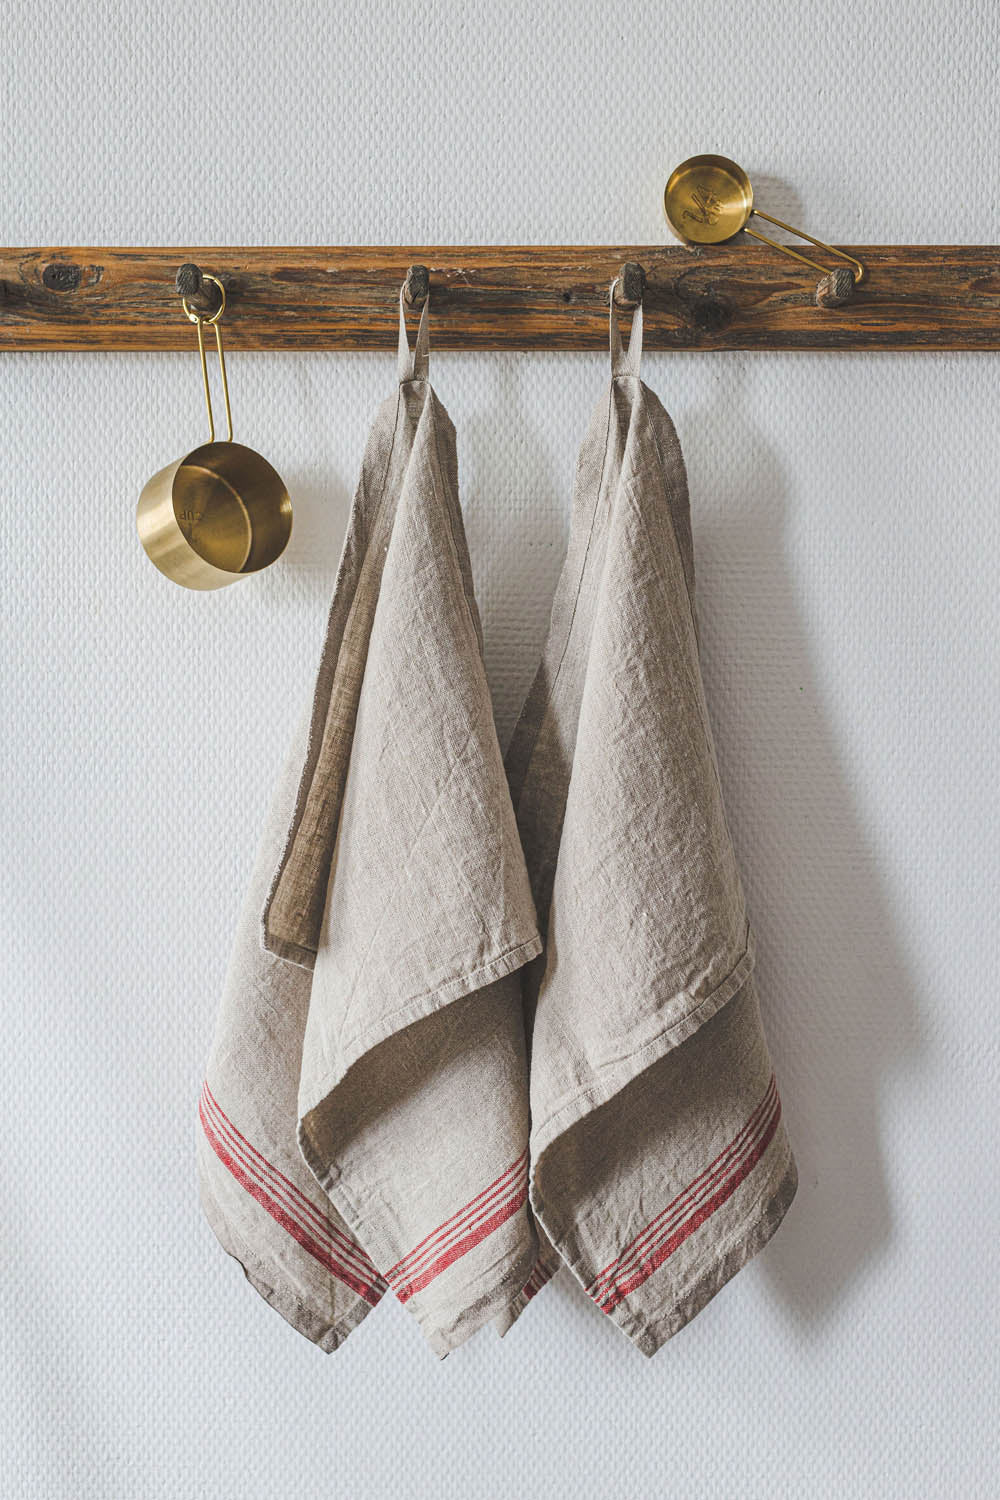 Natural linen tea towels with red stripes - set of 2